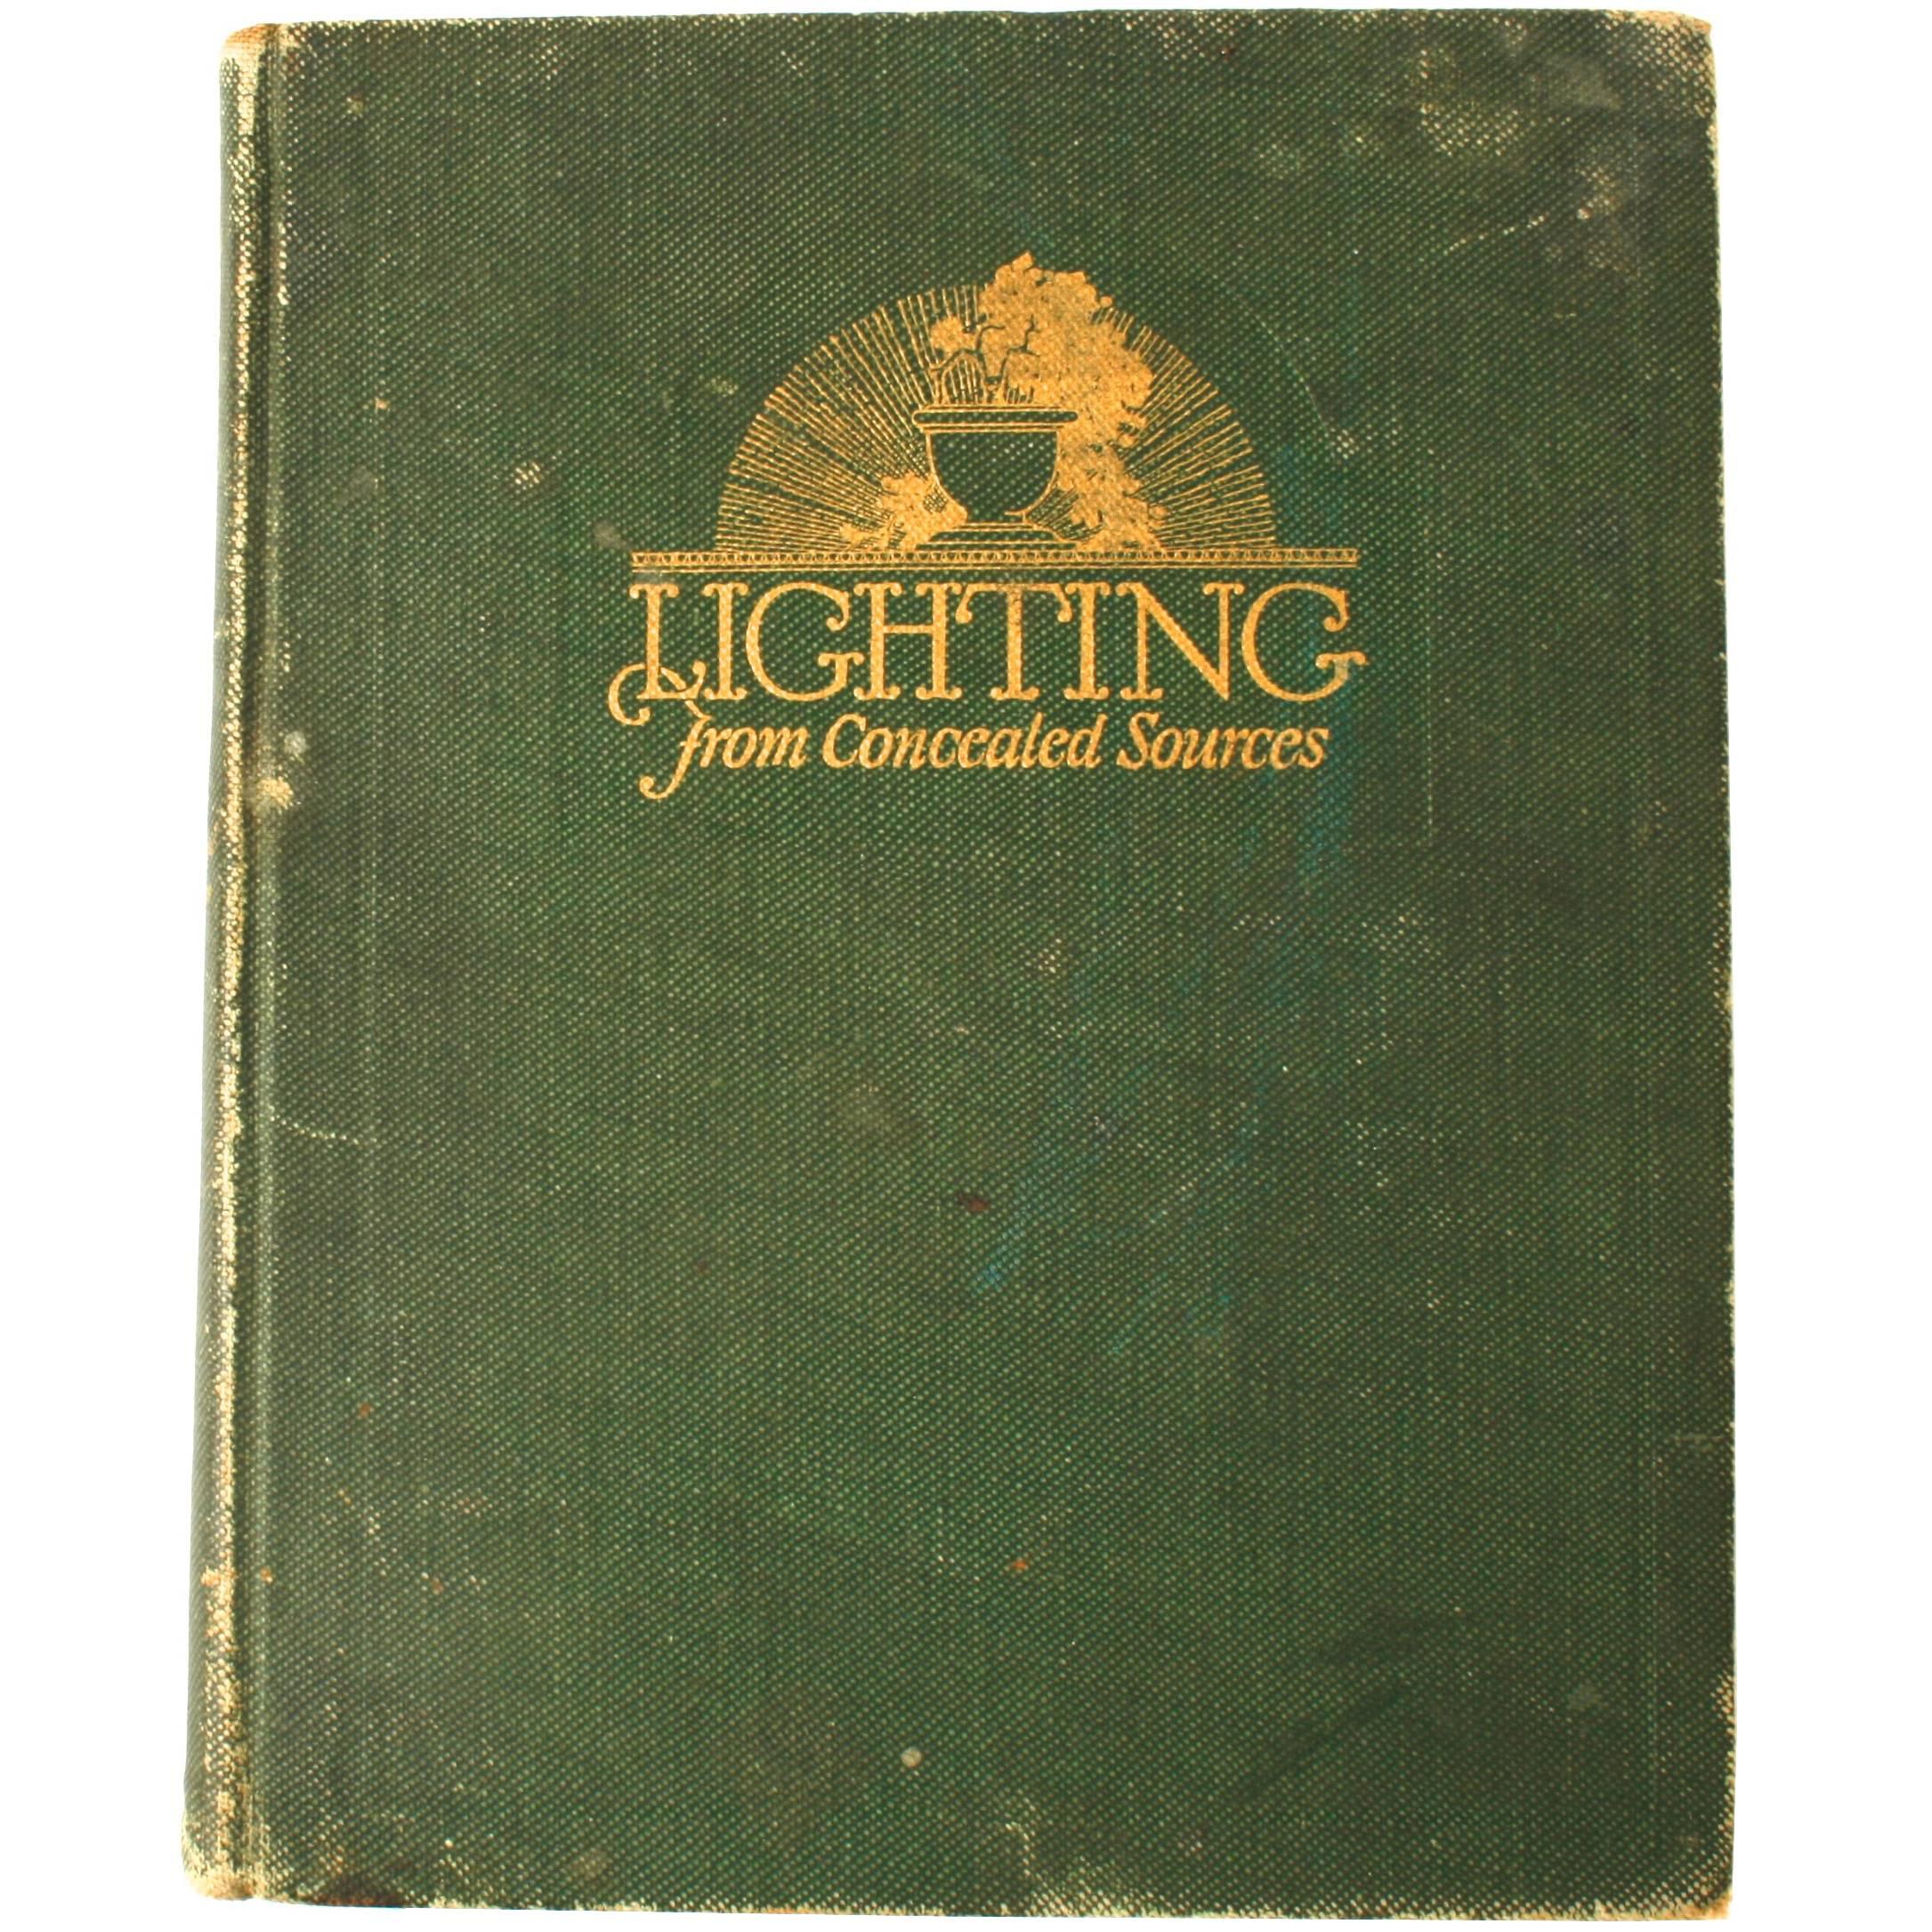 Lighting from Concealed Sources by J.L. Stair, Rare First Edition